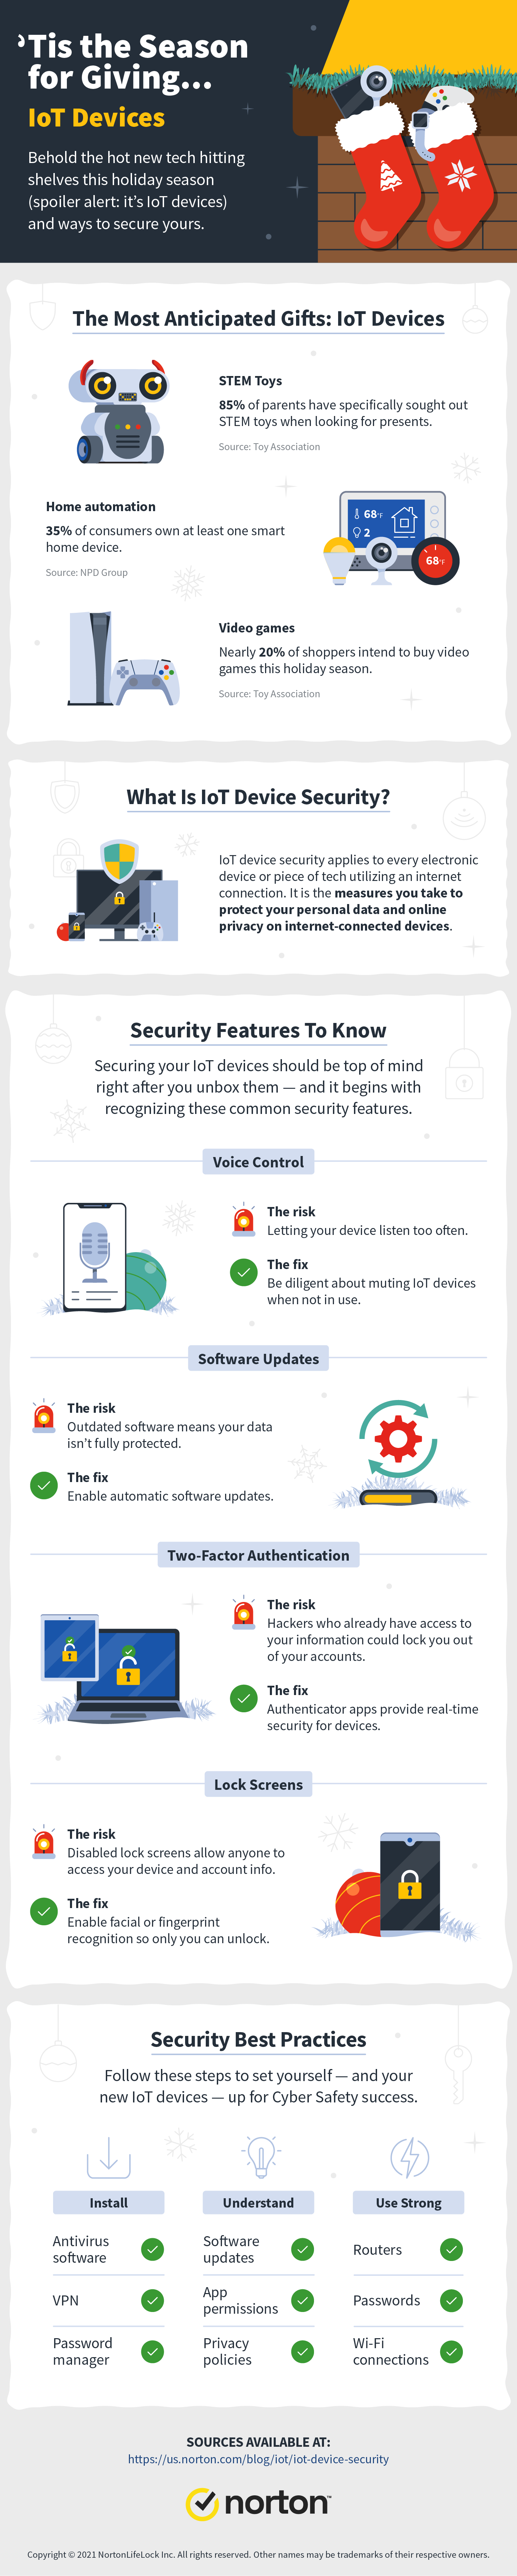 the season for IoT devices infographic